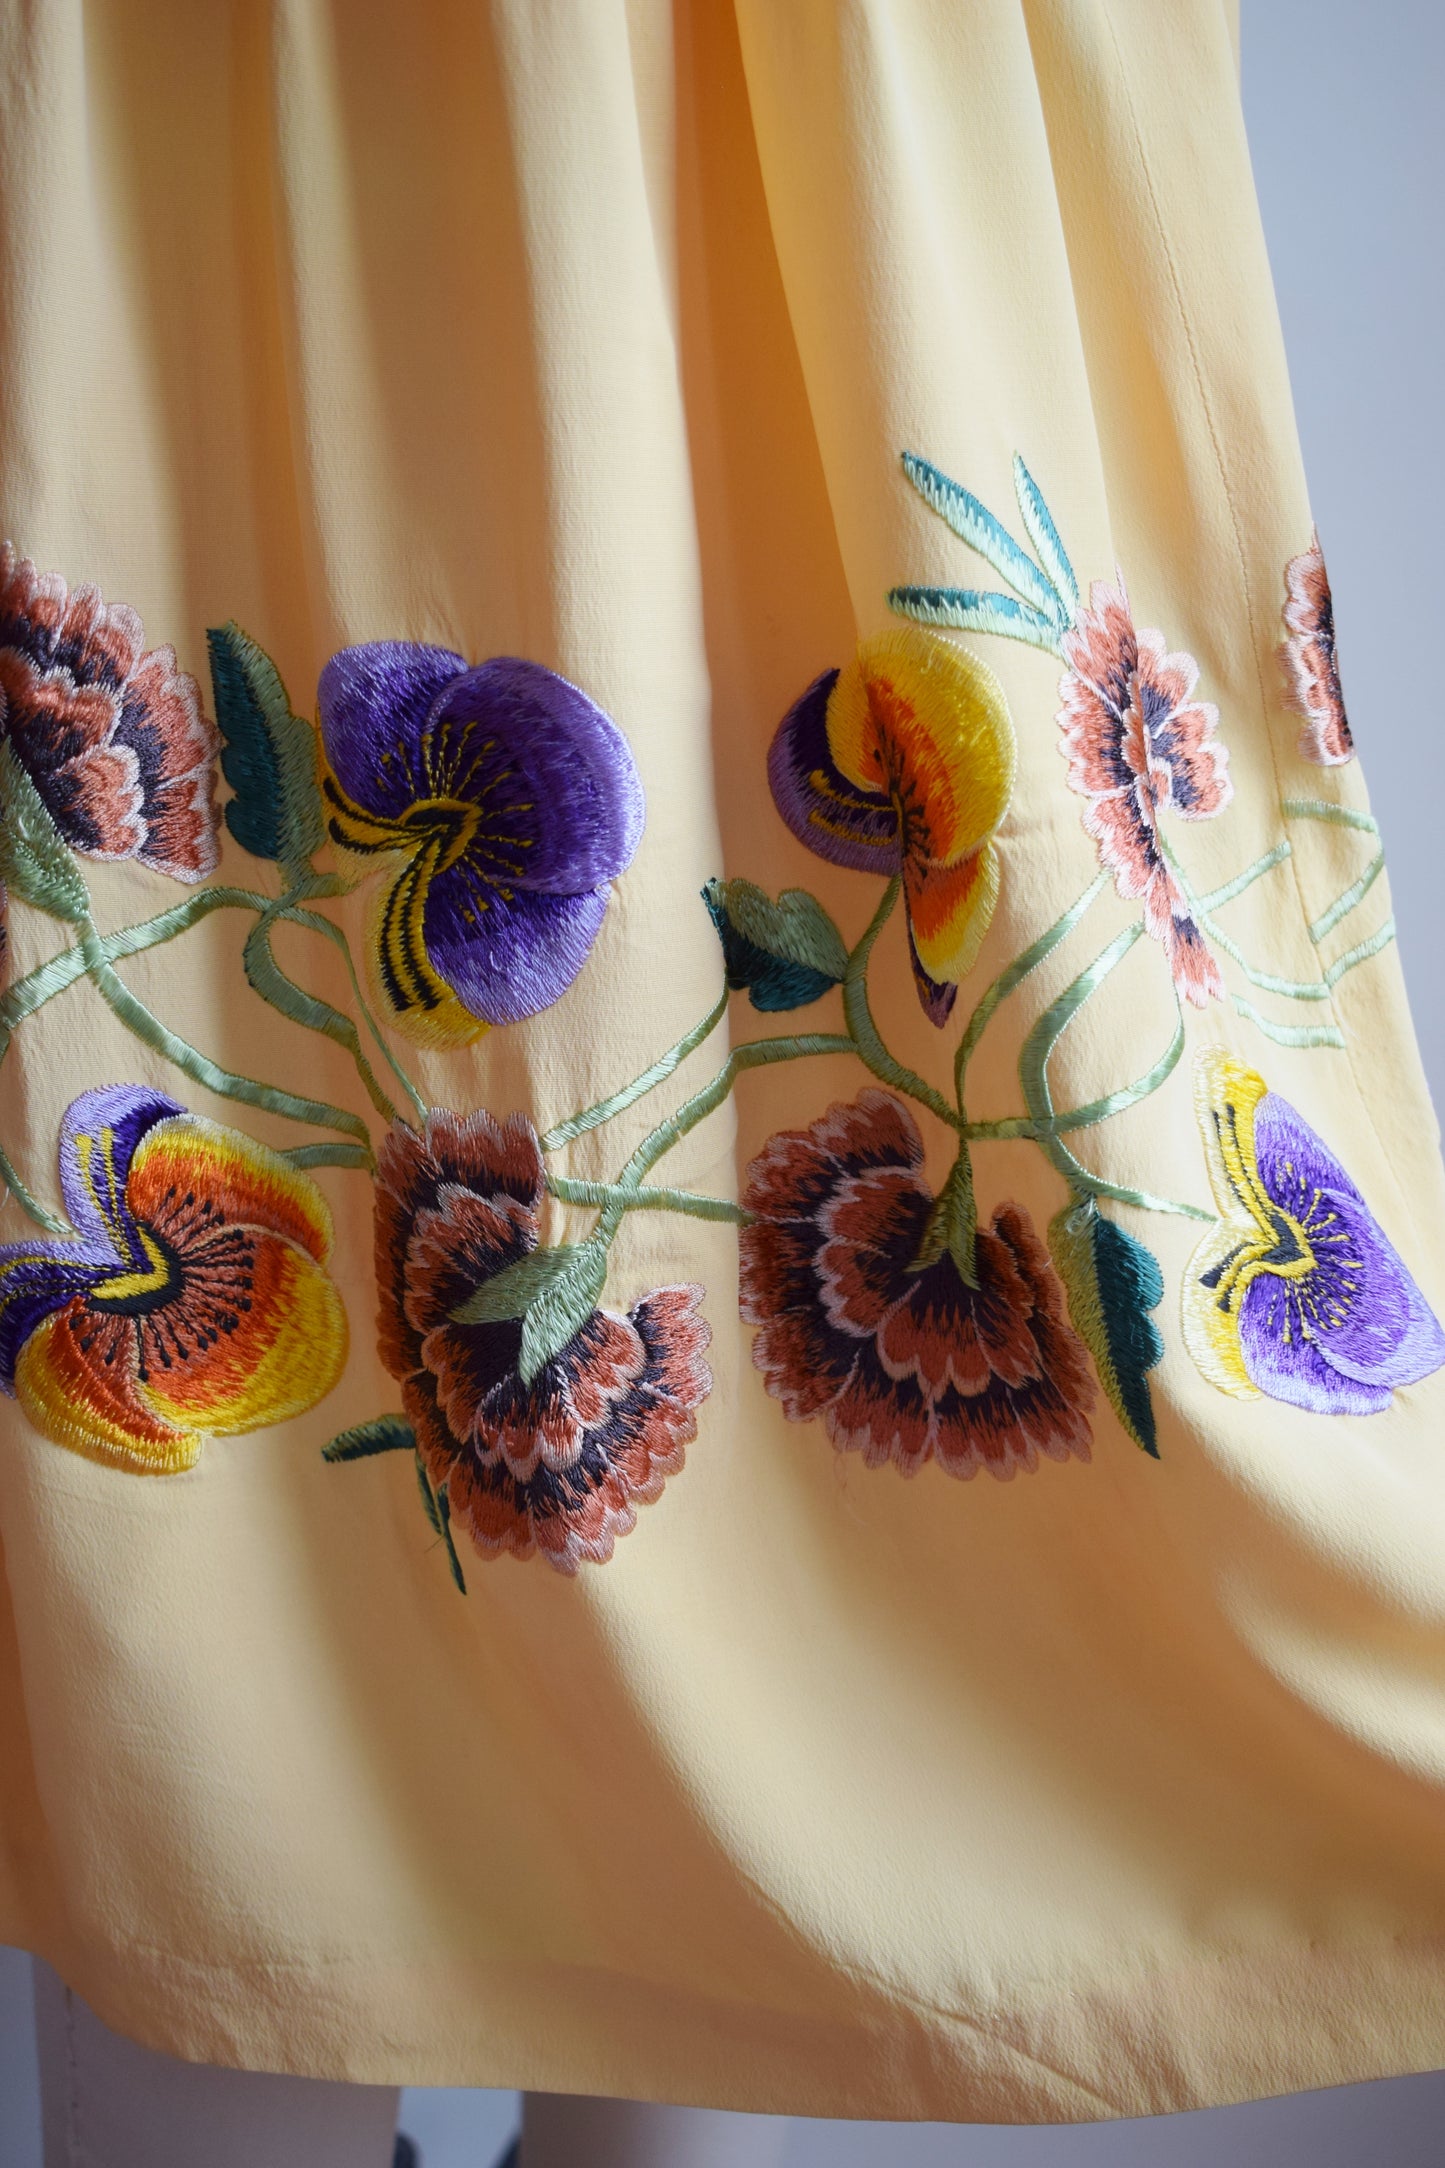 1940s Floral Embroidered Alice Skirt | XS/S